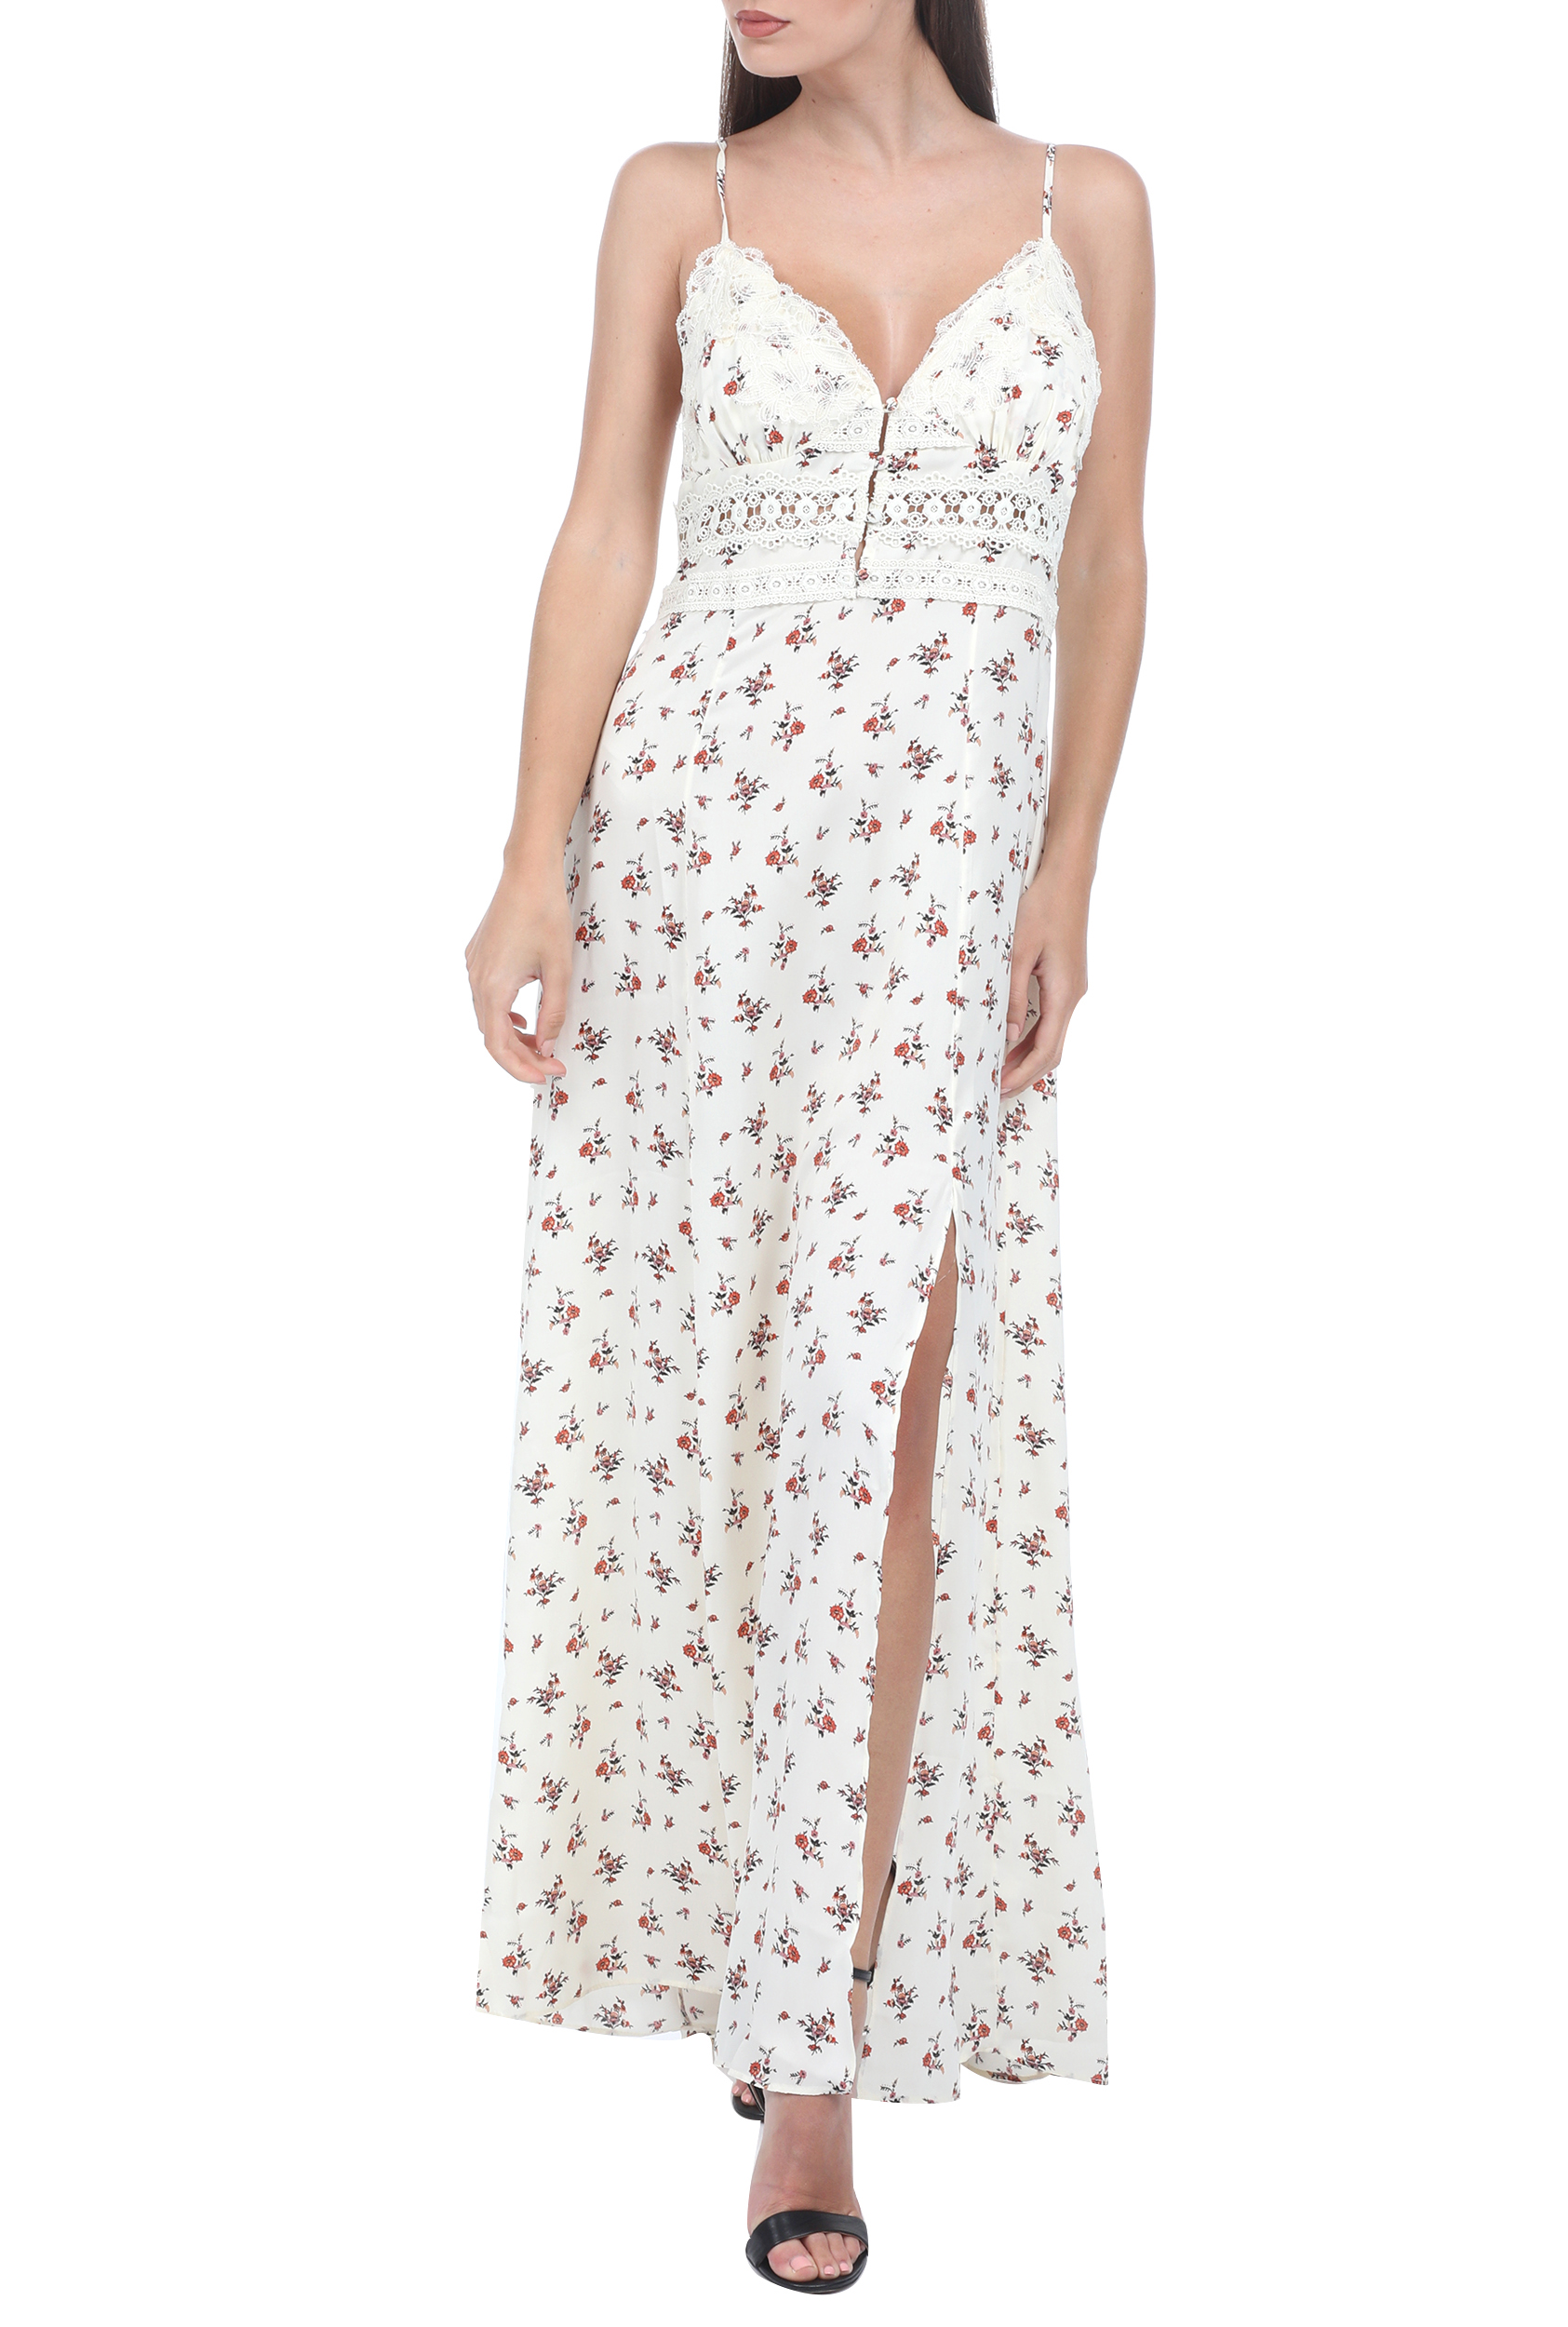 FREE PEOPLE COLLECTION – Γυναικείο φόρεμα FREE PEOPLE OUT & ABOUT εκρού 1810890.0-00M6